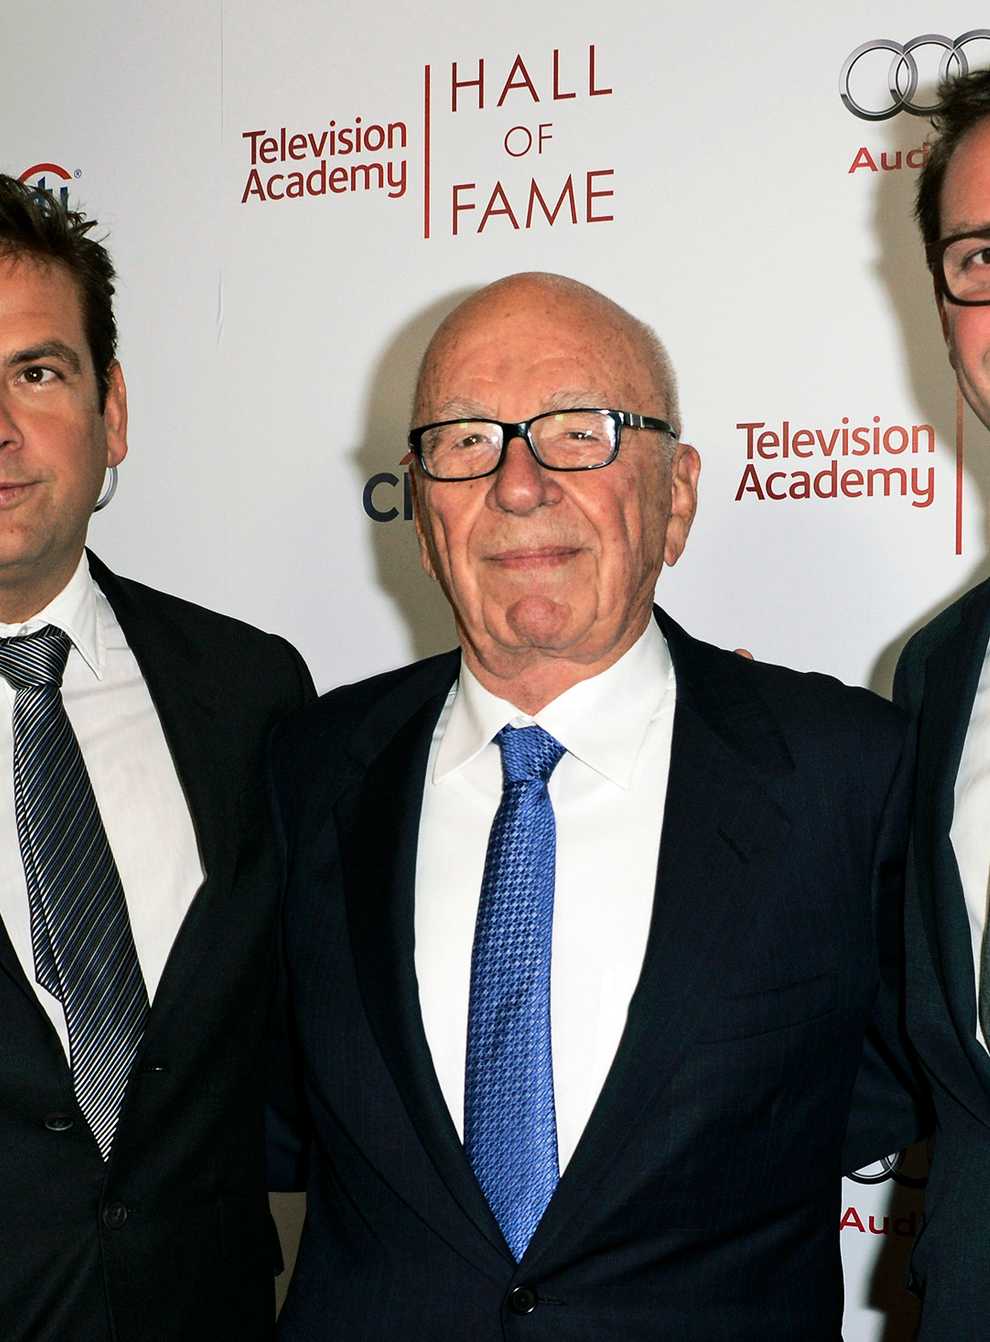 Fox Corp chief executive Lachlan Murdoch is suing Australian news website Crikey in a Sydney court for defamation over an opinion piece about last year’s storming of the US Capitol (Dan Steinberg/Invision/AP)